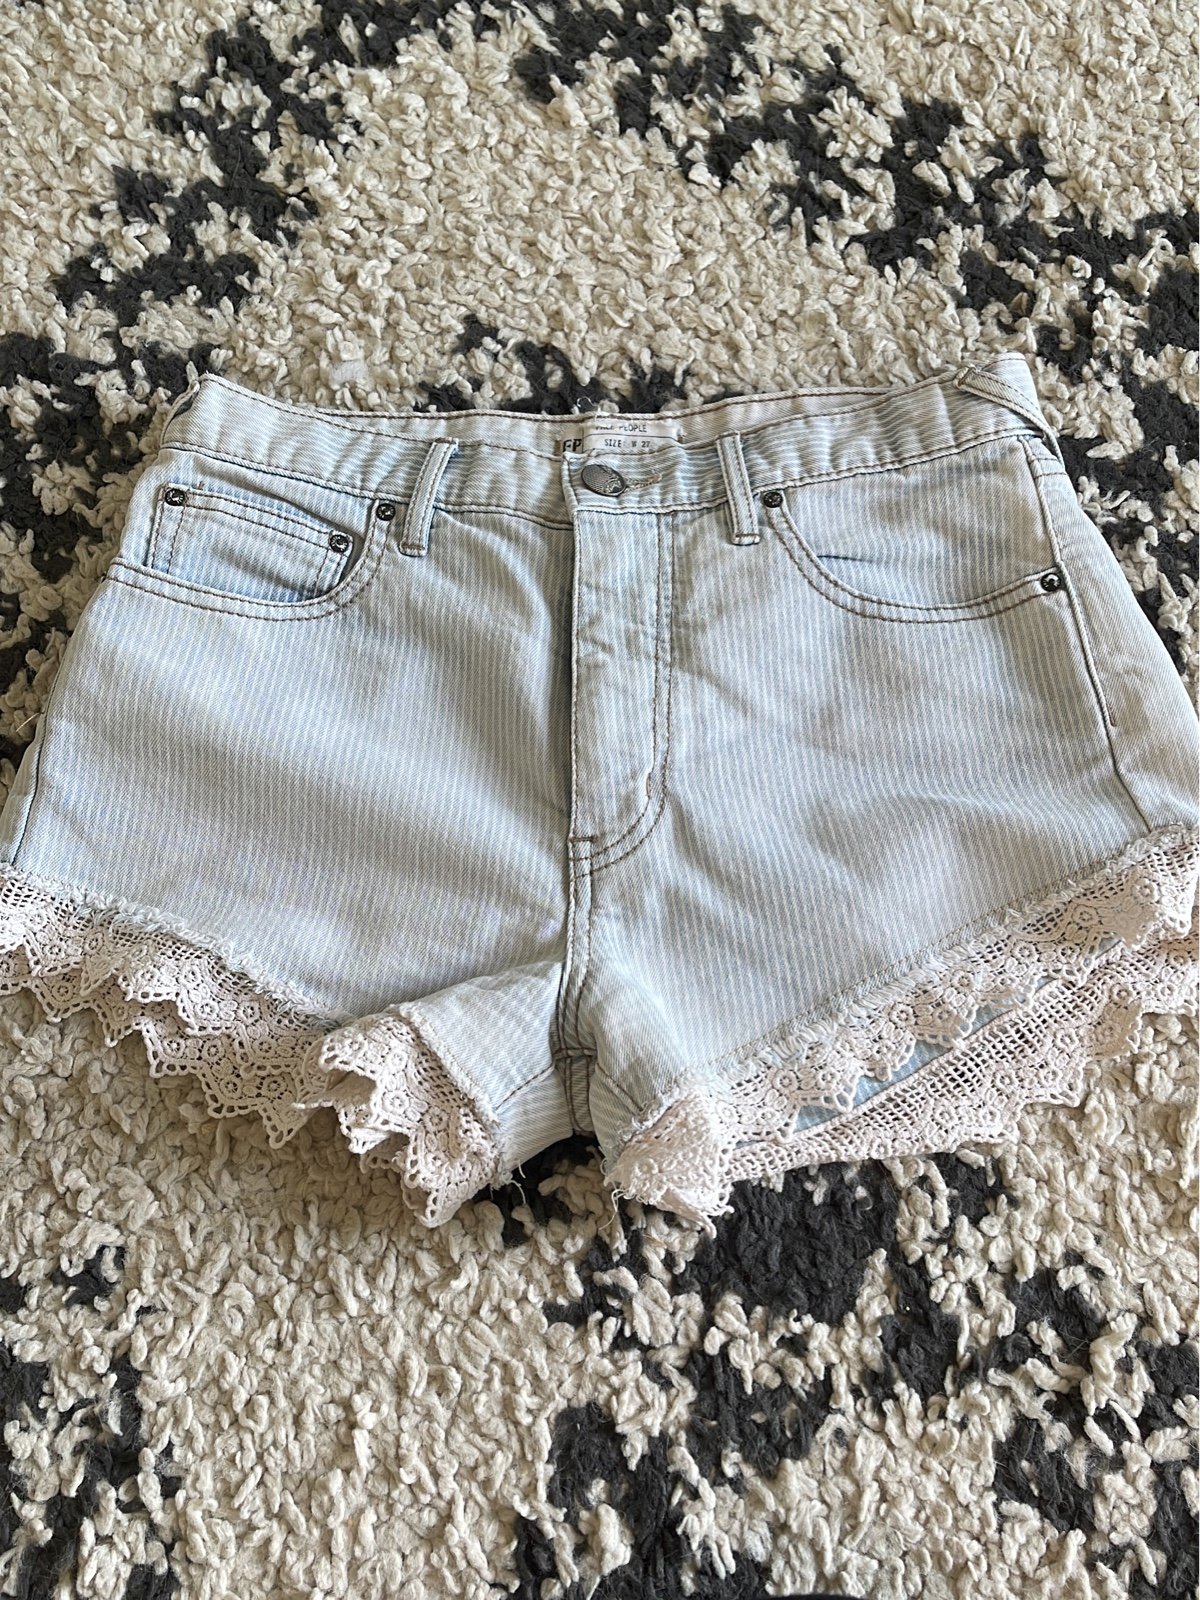 Popular Free people Jean Shorts nZ87nfgFx Buying Cheap